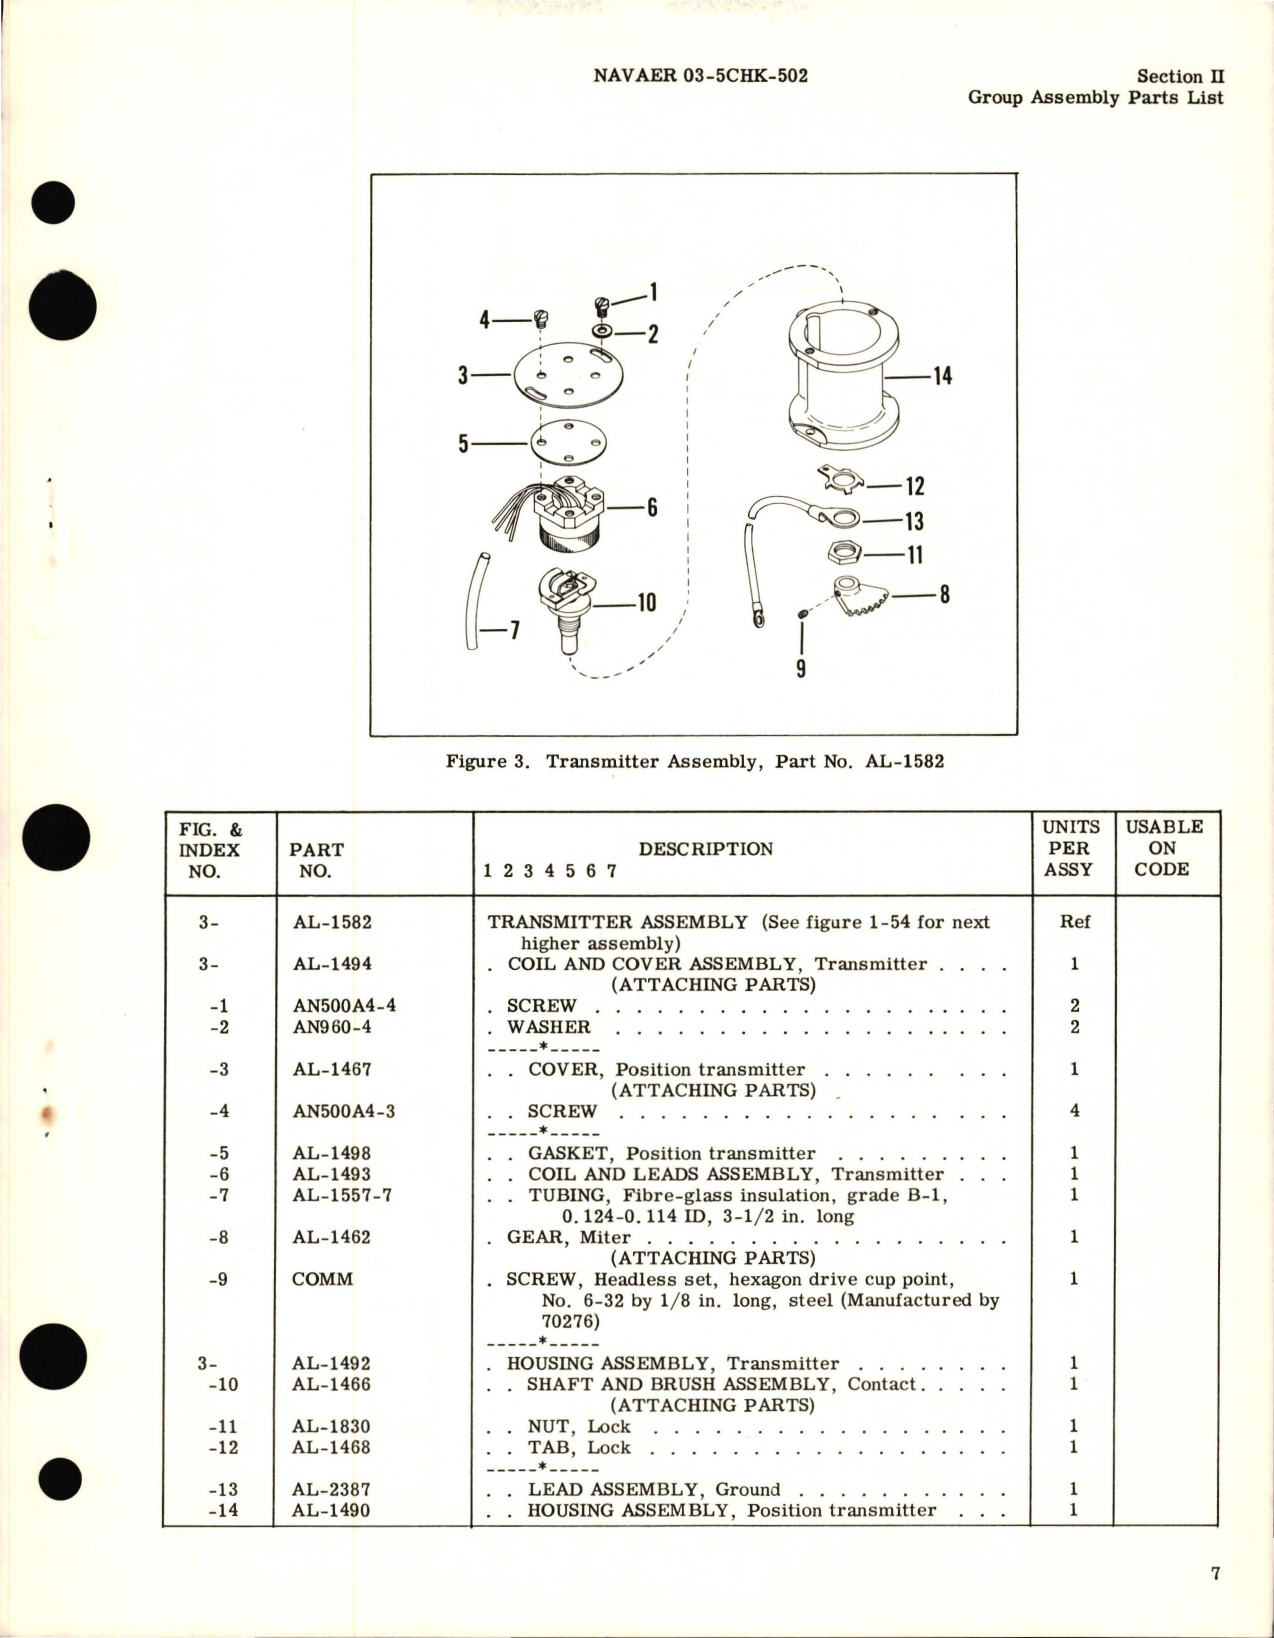 Sample page 9 from AirCorps Library document: Illustrated Parts Breakdown for Actuator Assembly, Aileron Artificial Feel Trim Part Numbers AL-1910 and AL-1423-1